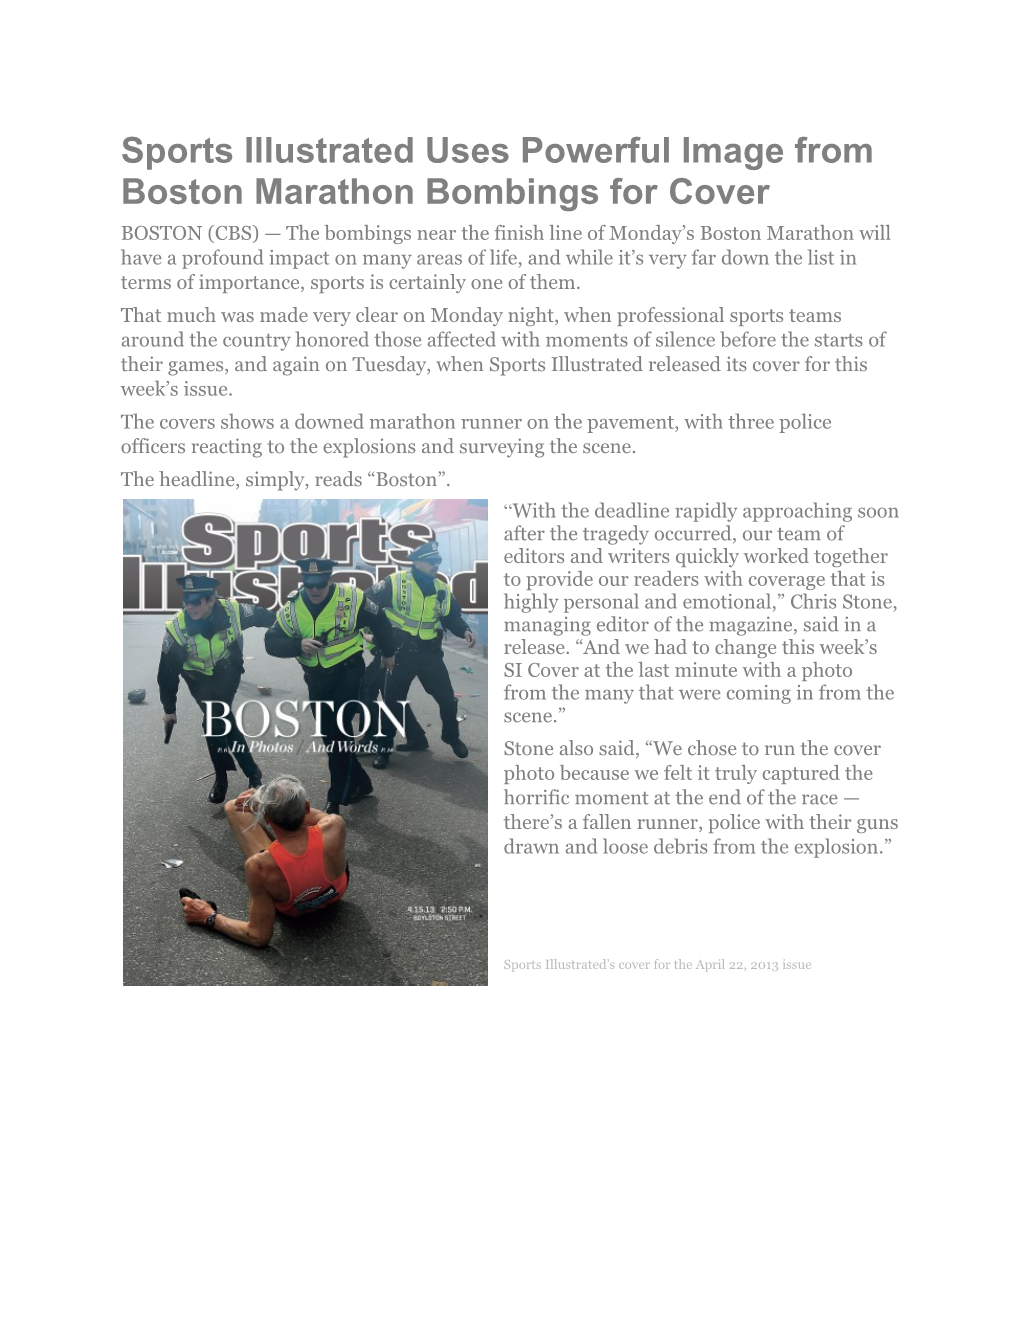 Sports Illustrated Uses Powerful Image from Boston Marathon Bombings for Cover